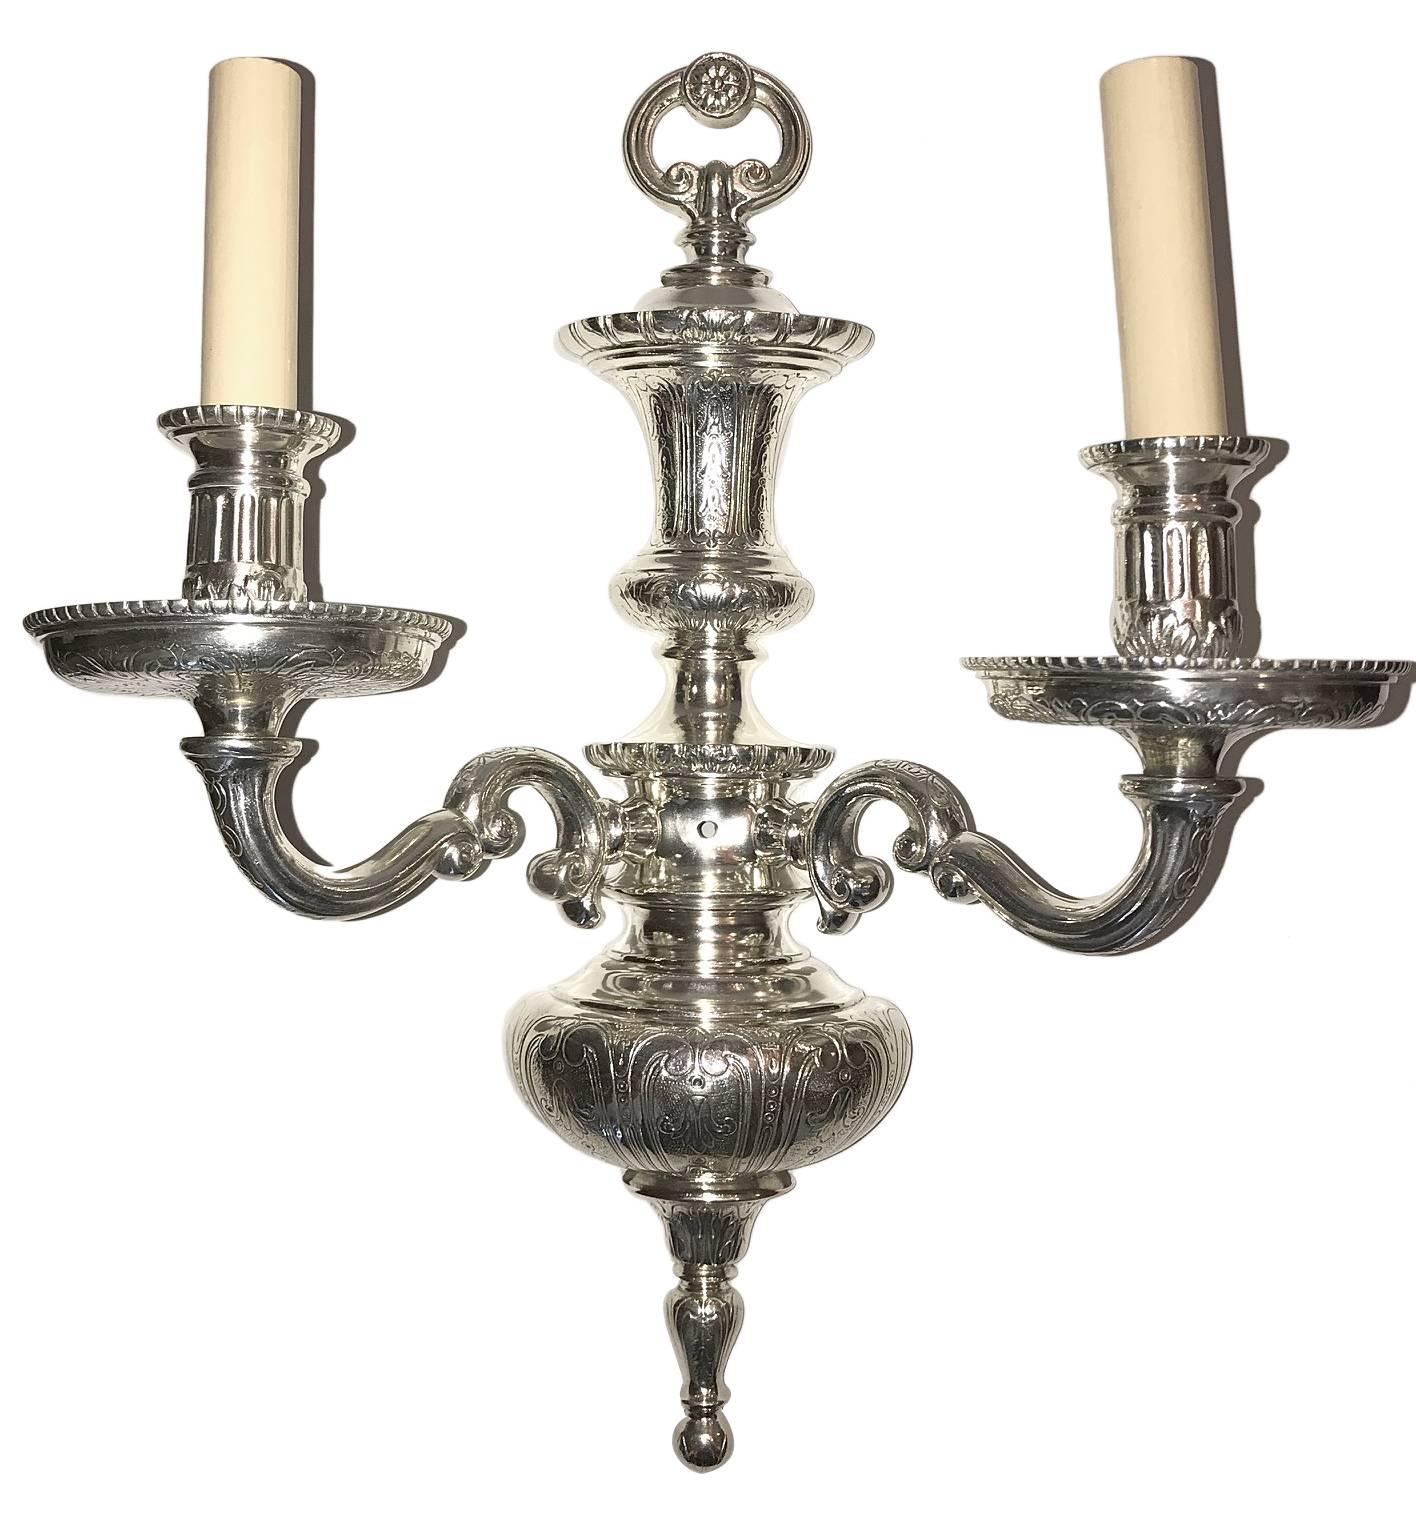 Pair of 1920s silver plated double light sconces with etched body.

Measurements
Height: 16.5